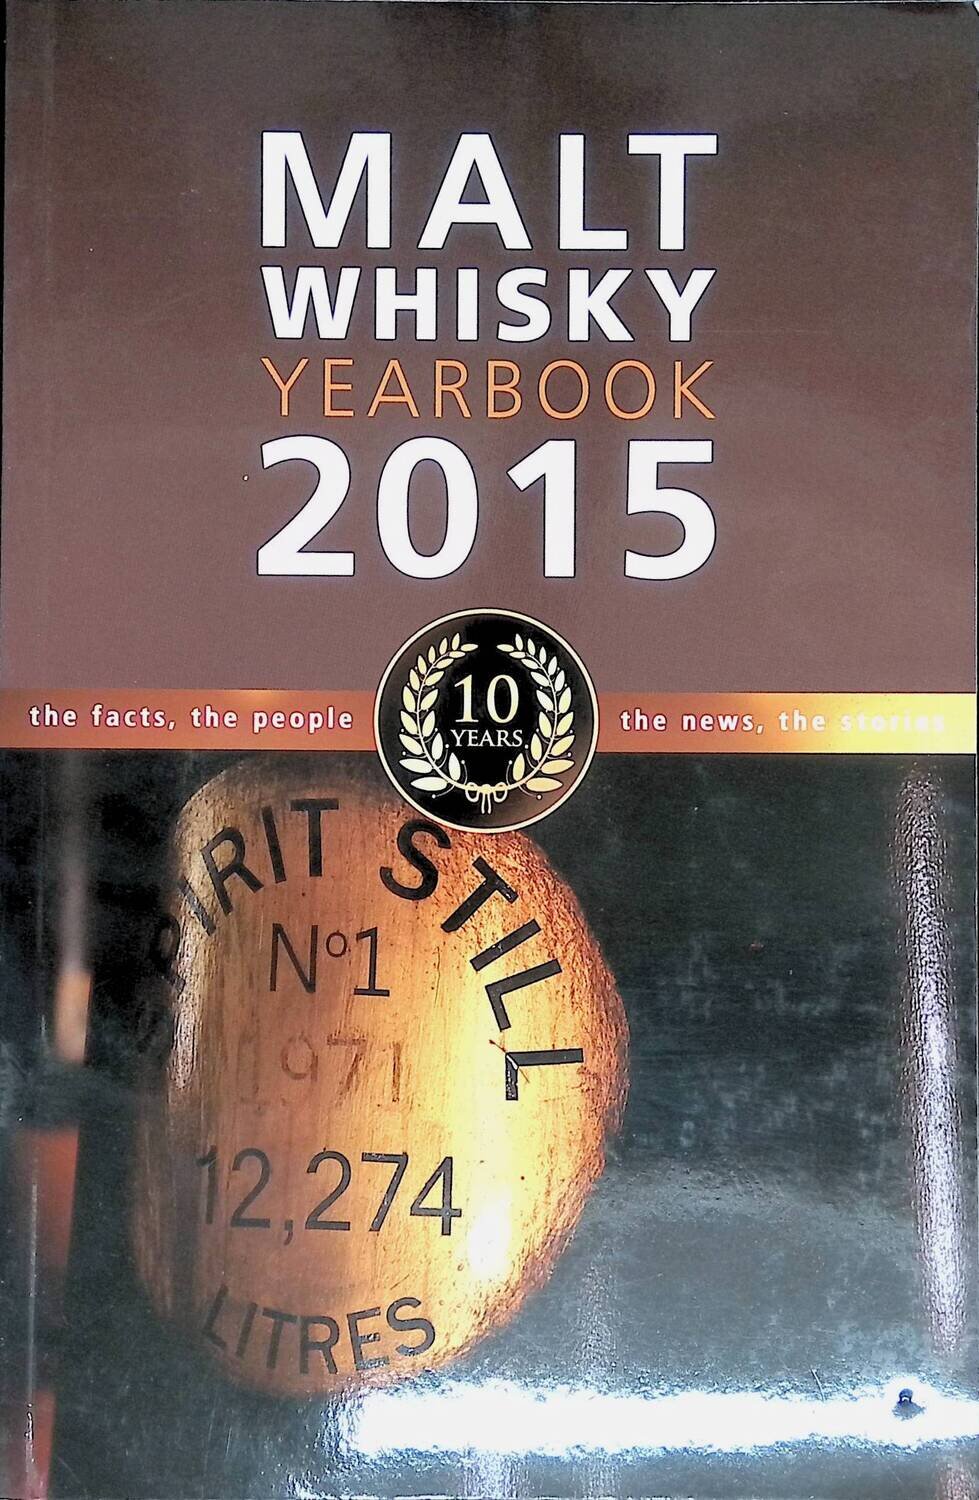 Malt Whisky Yearbook 2015: The Facts, the People, the News, the Stories; Ingvar Ronde